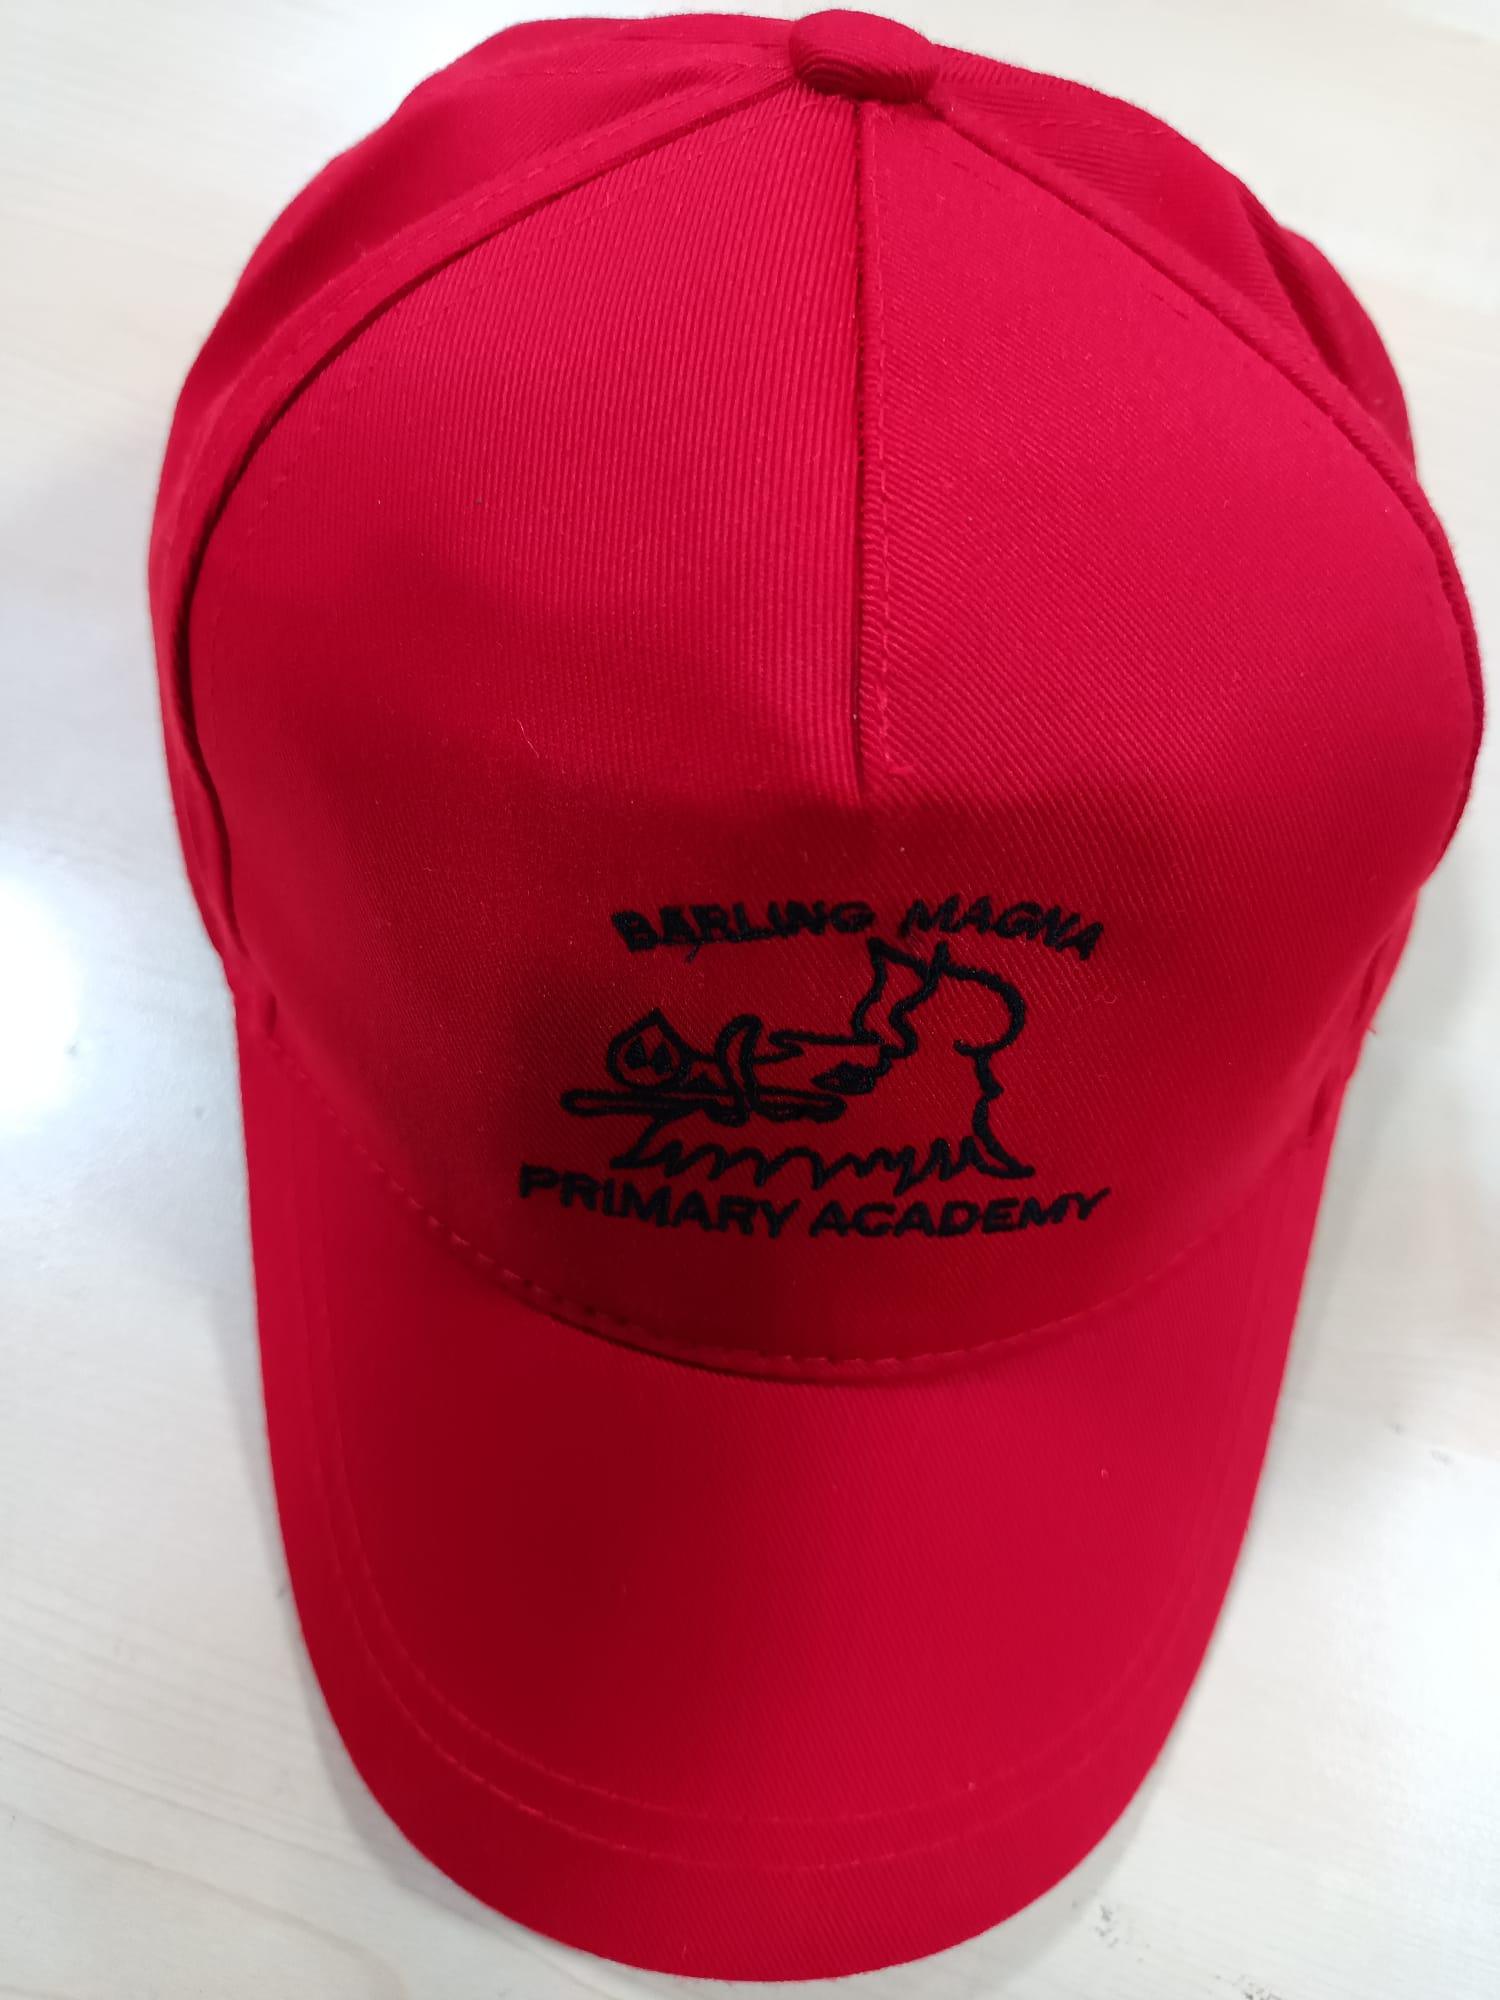 Barling Magna Primary Academy  | Red Baseball Cap & Beanie Hat with School Logo